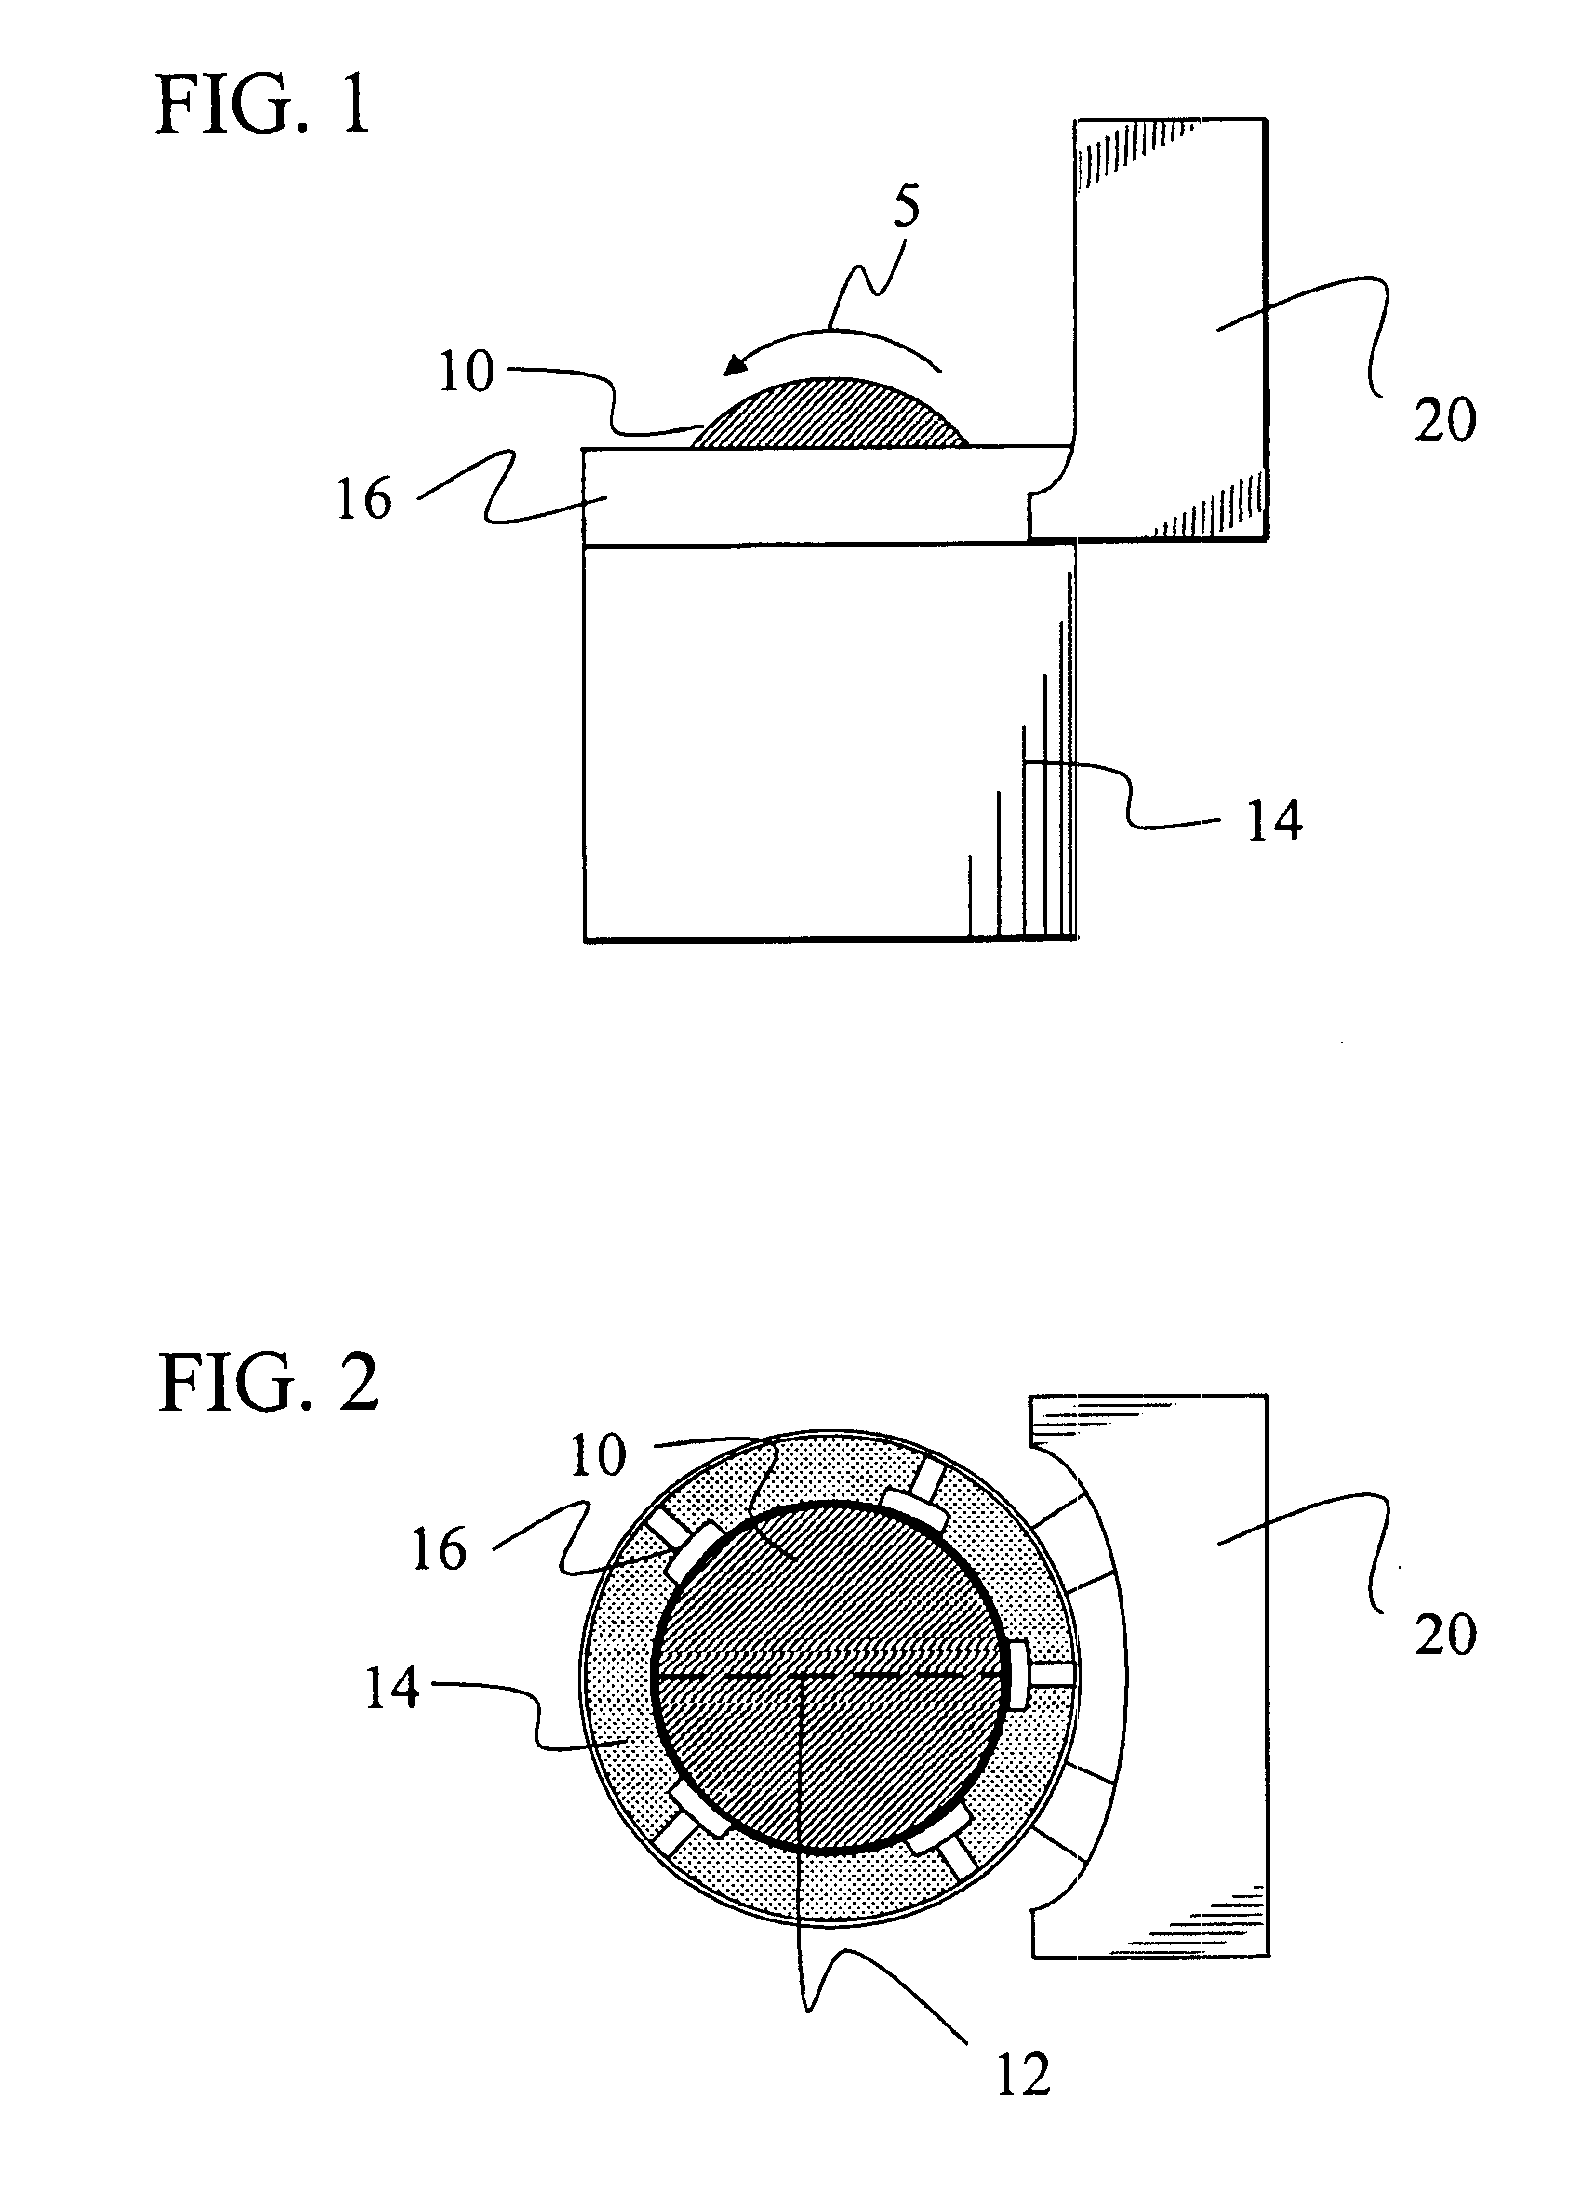 Method and device for marking golf balls